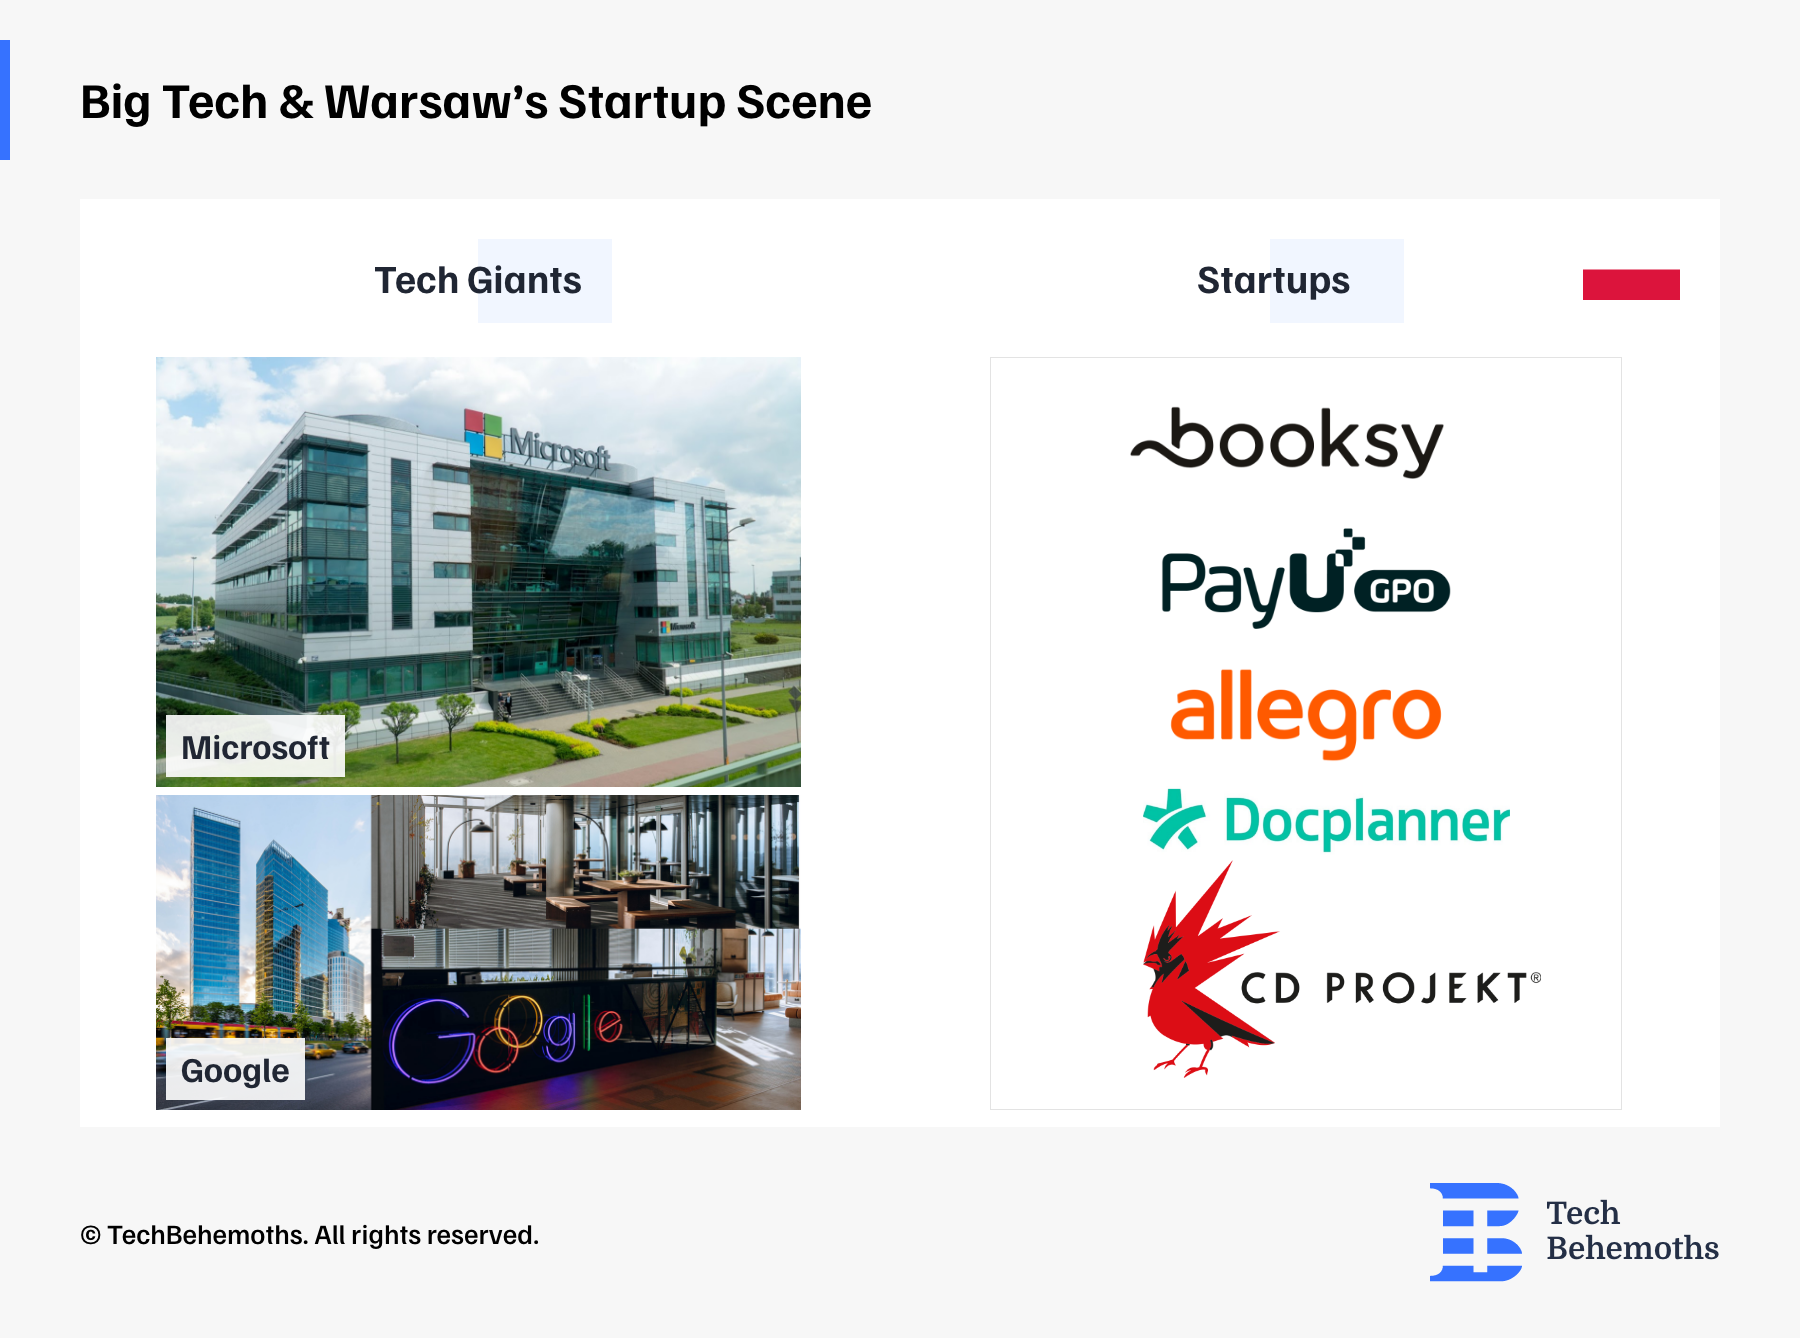 big tech and startups in Warsaw